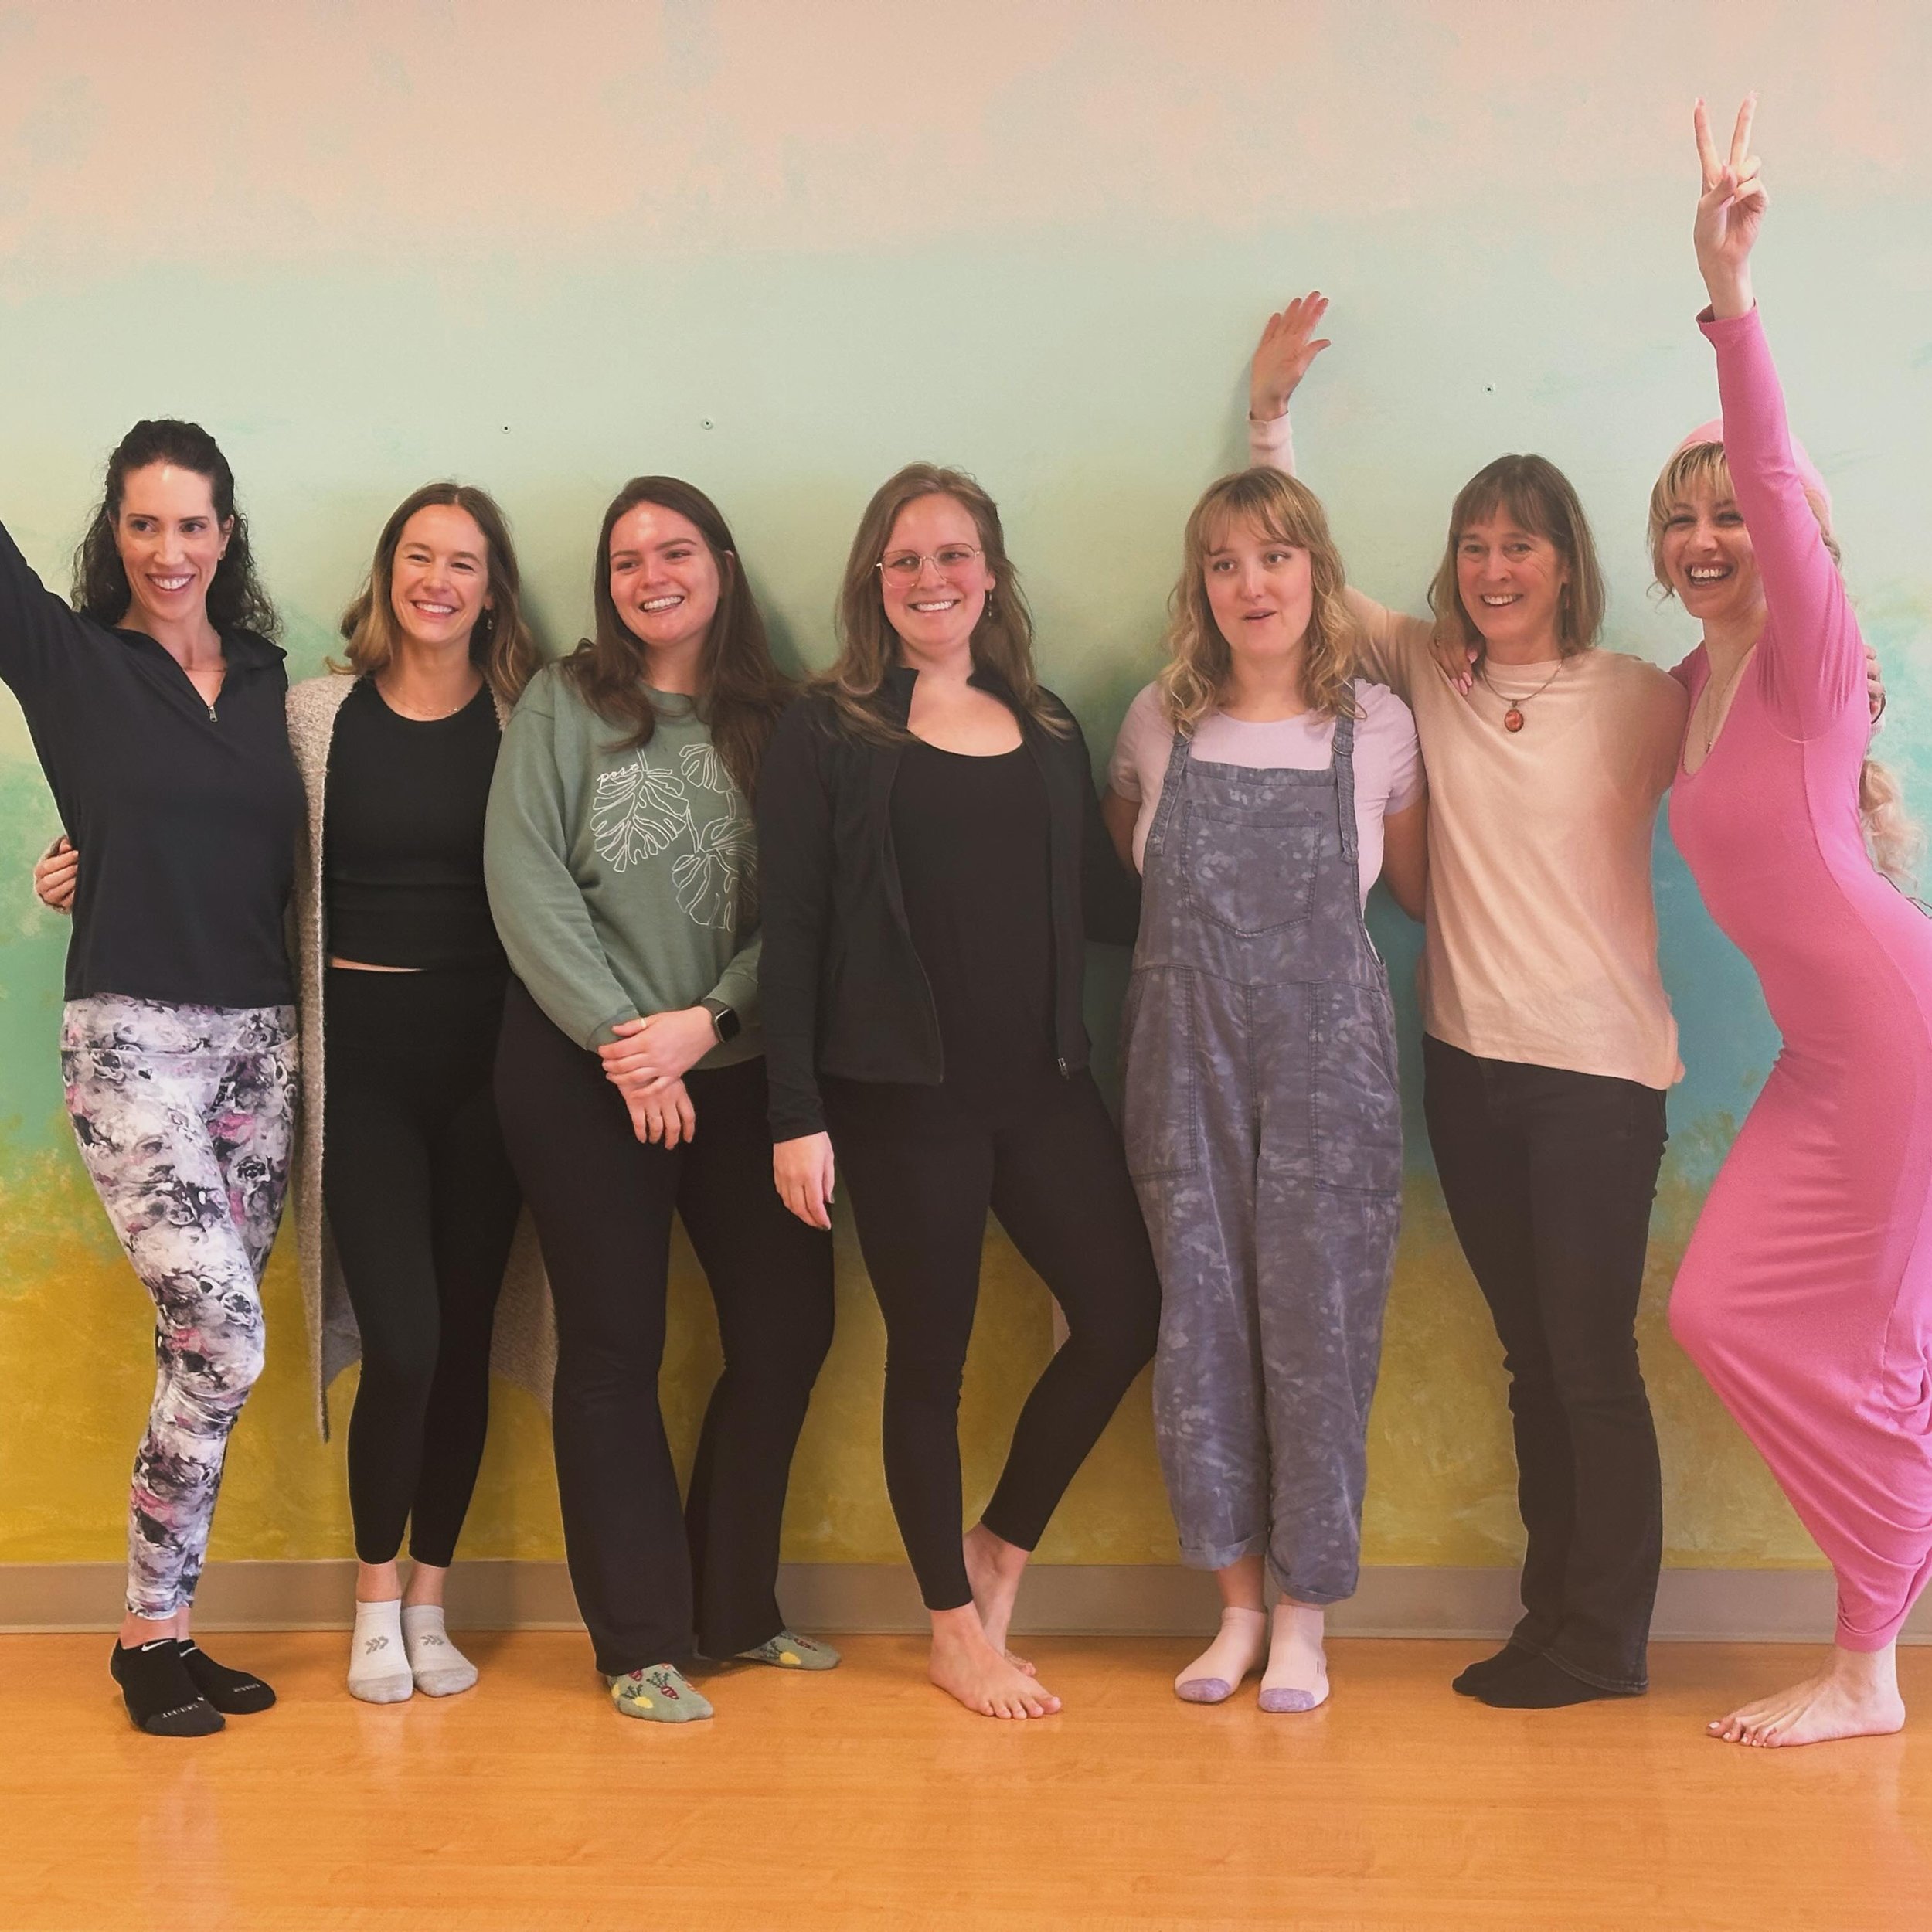 CONGRATULATIONS 🍾🍾🍾🍾 to these amazing new yoga teachers! It&rsquo;s just the beginning &hellip; go forth, do good, keep learning! We cannot wait to hear about all the amazing things you do!